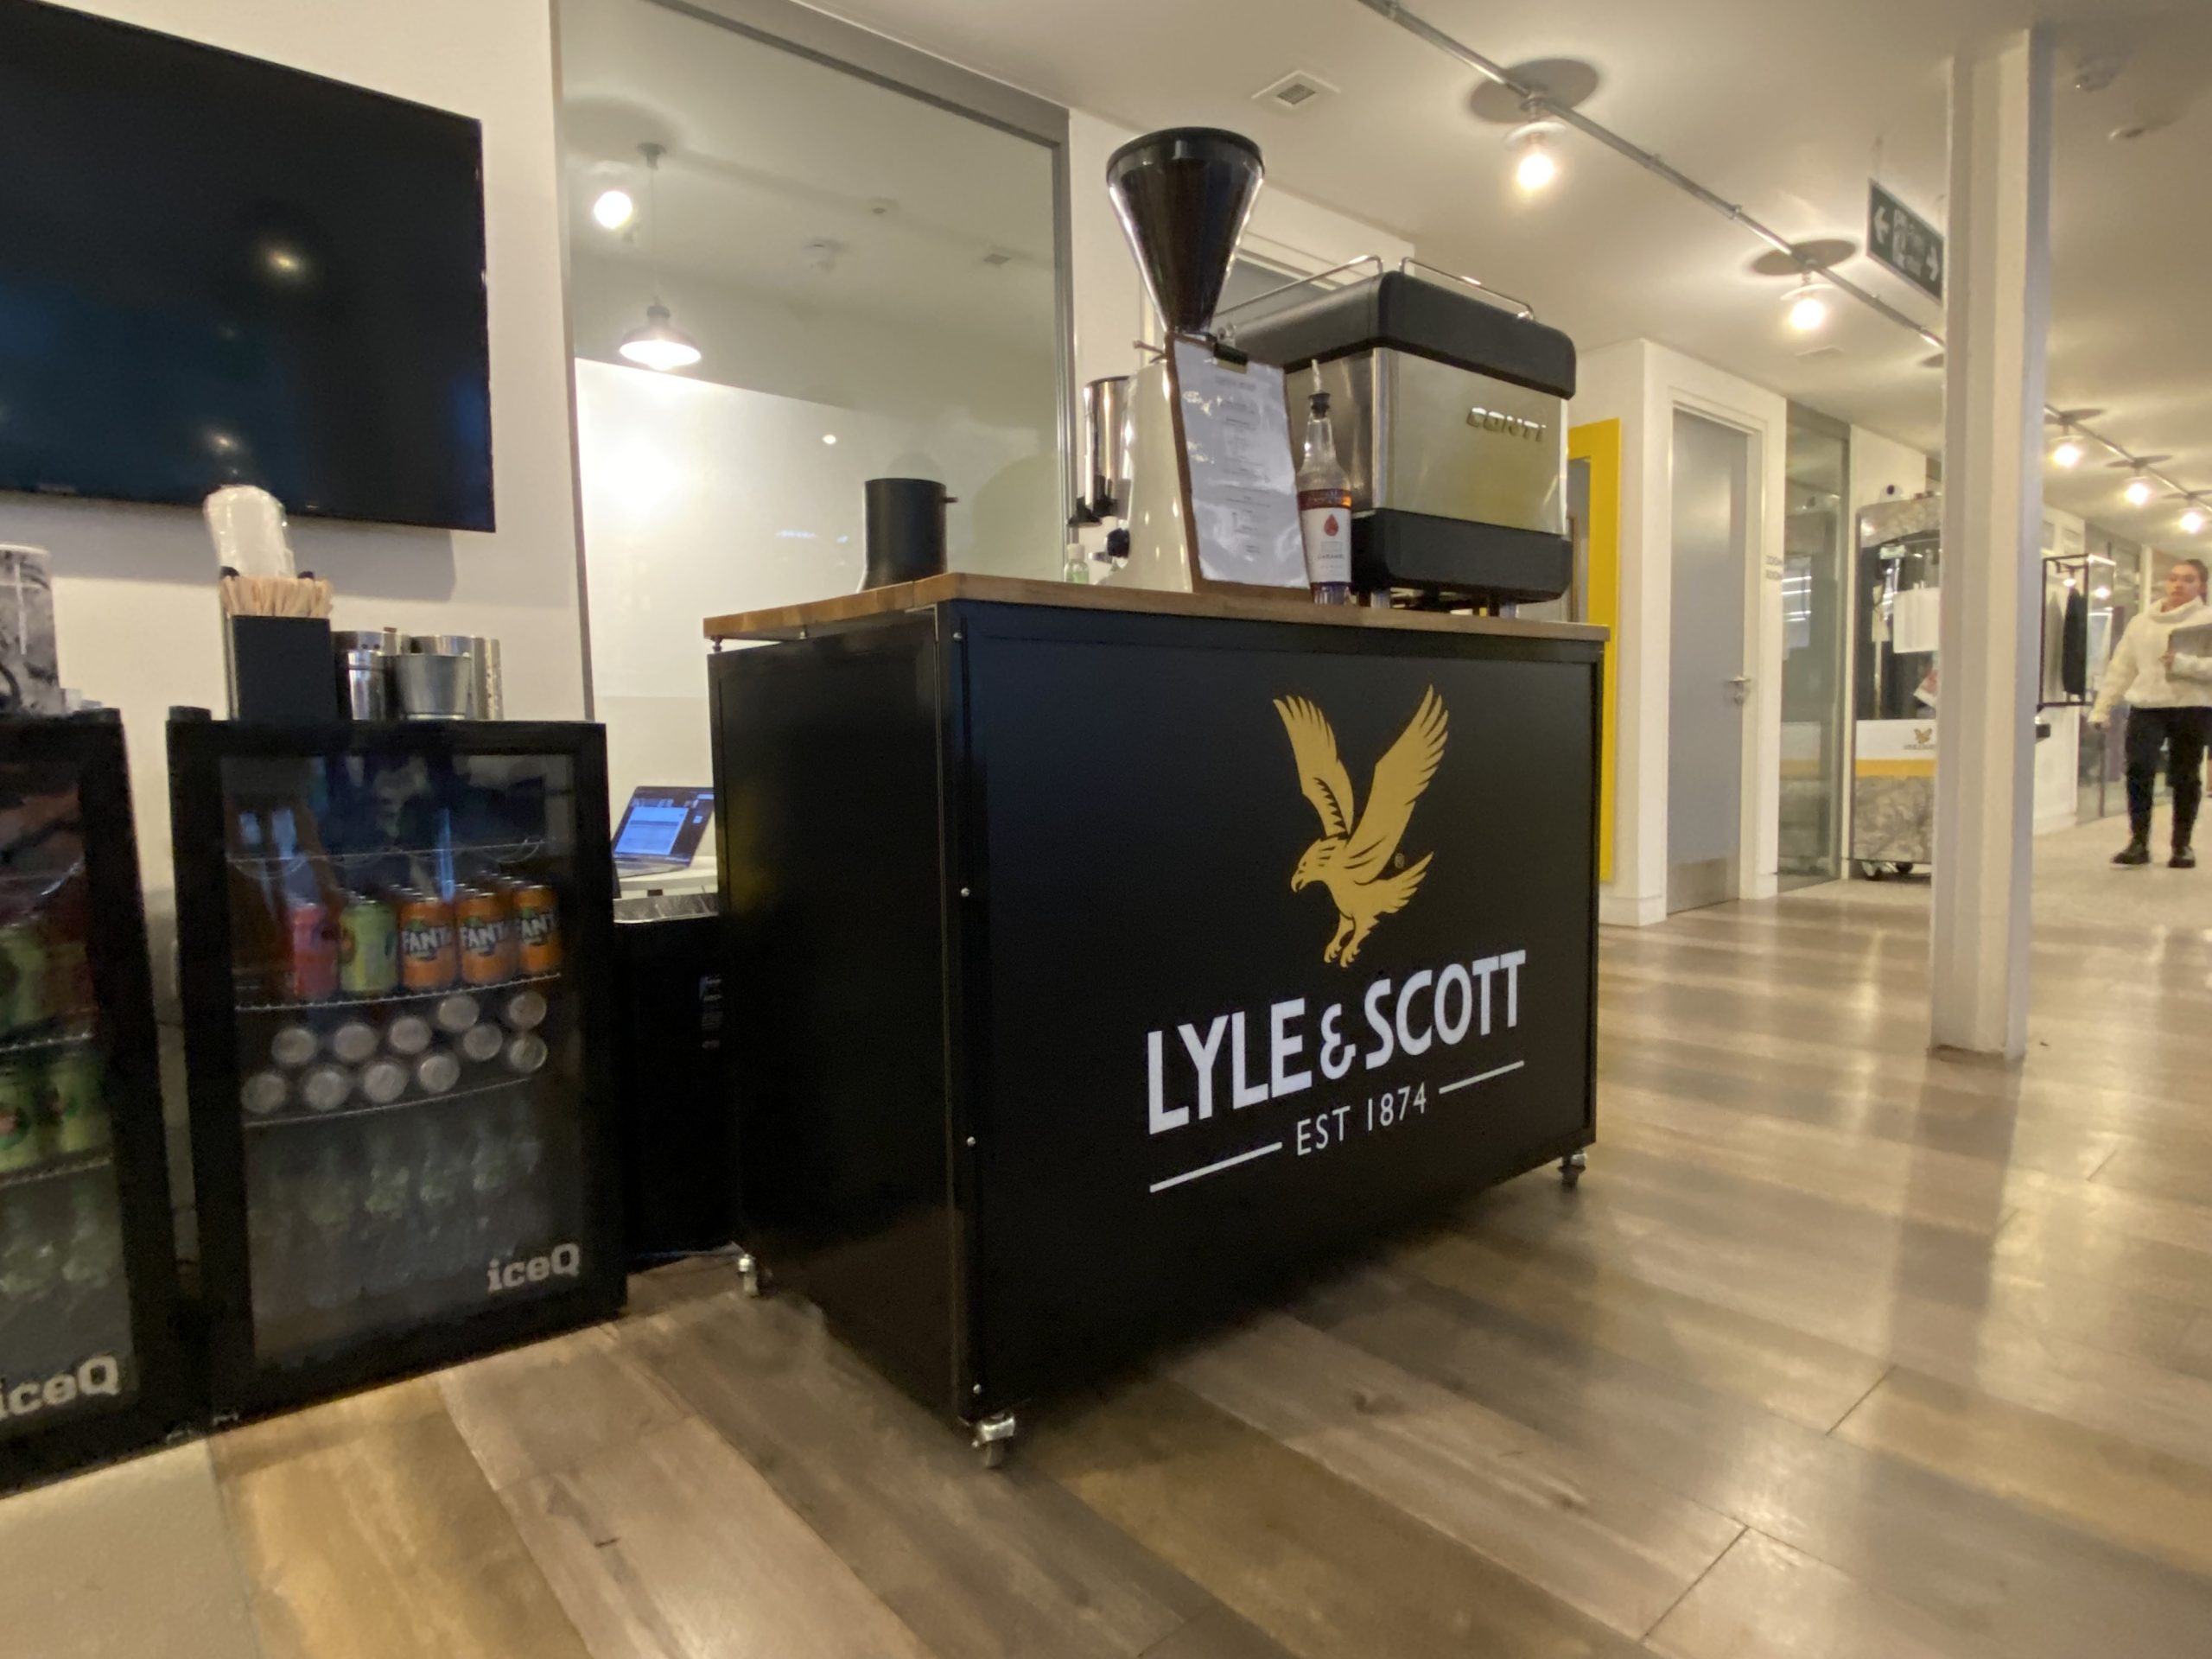 The Mobile Coffee Bean Lyle & Scott branded coffee bar